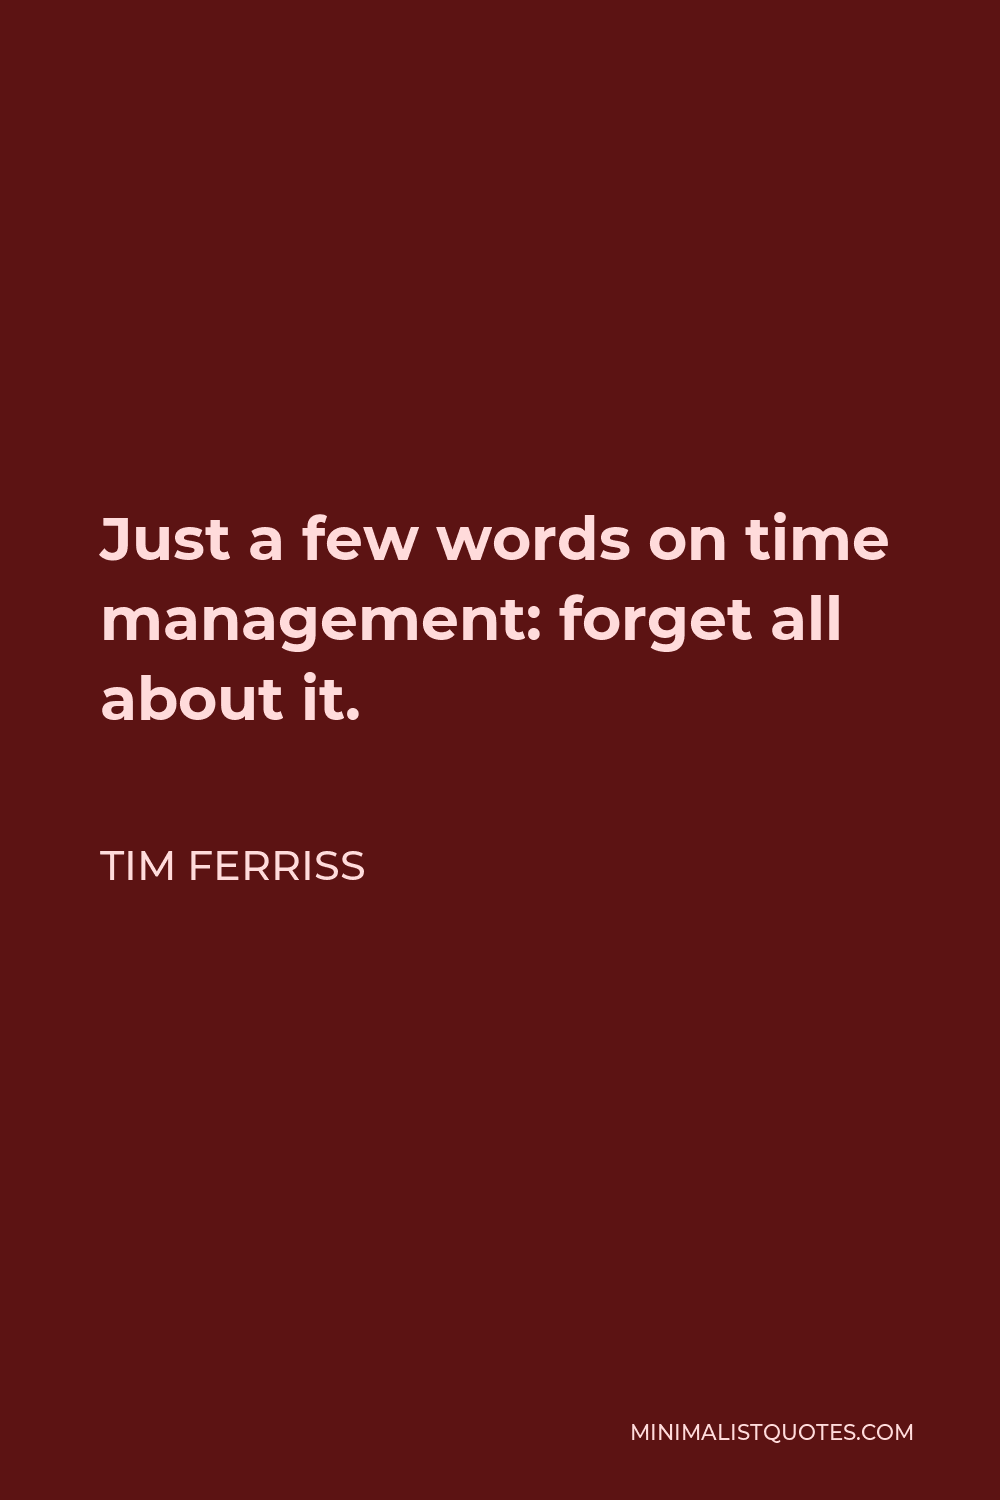 Tim Ferriss Quote - Just a few words on time management: forget all about it.